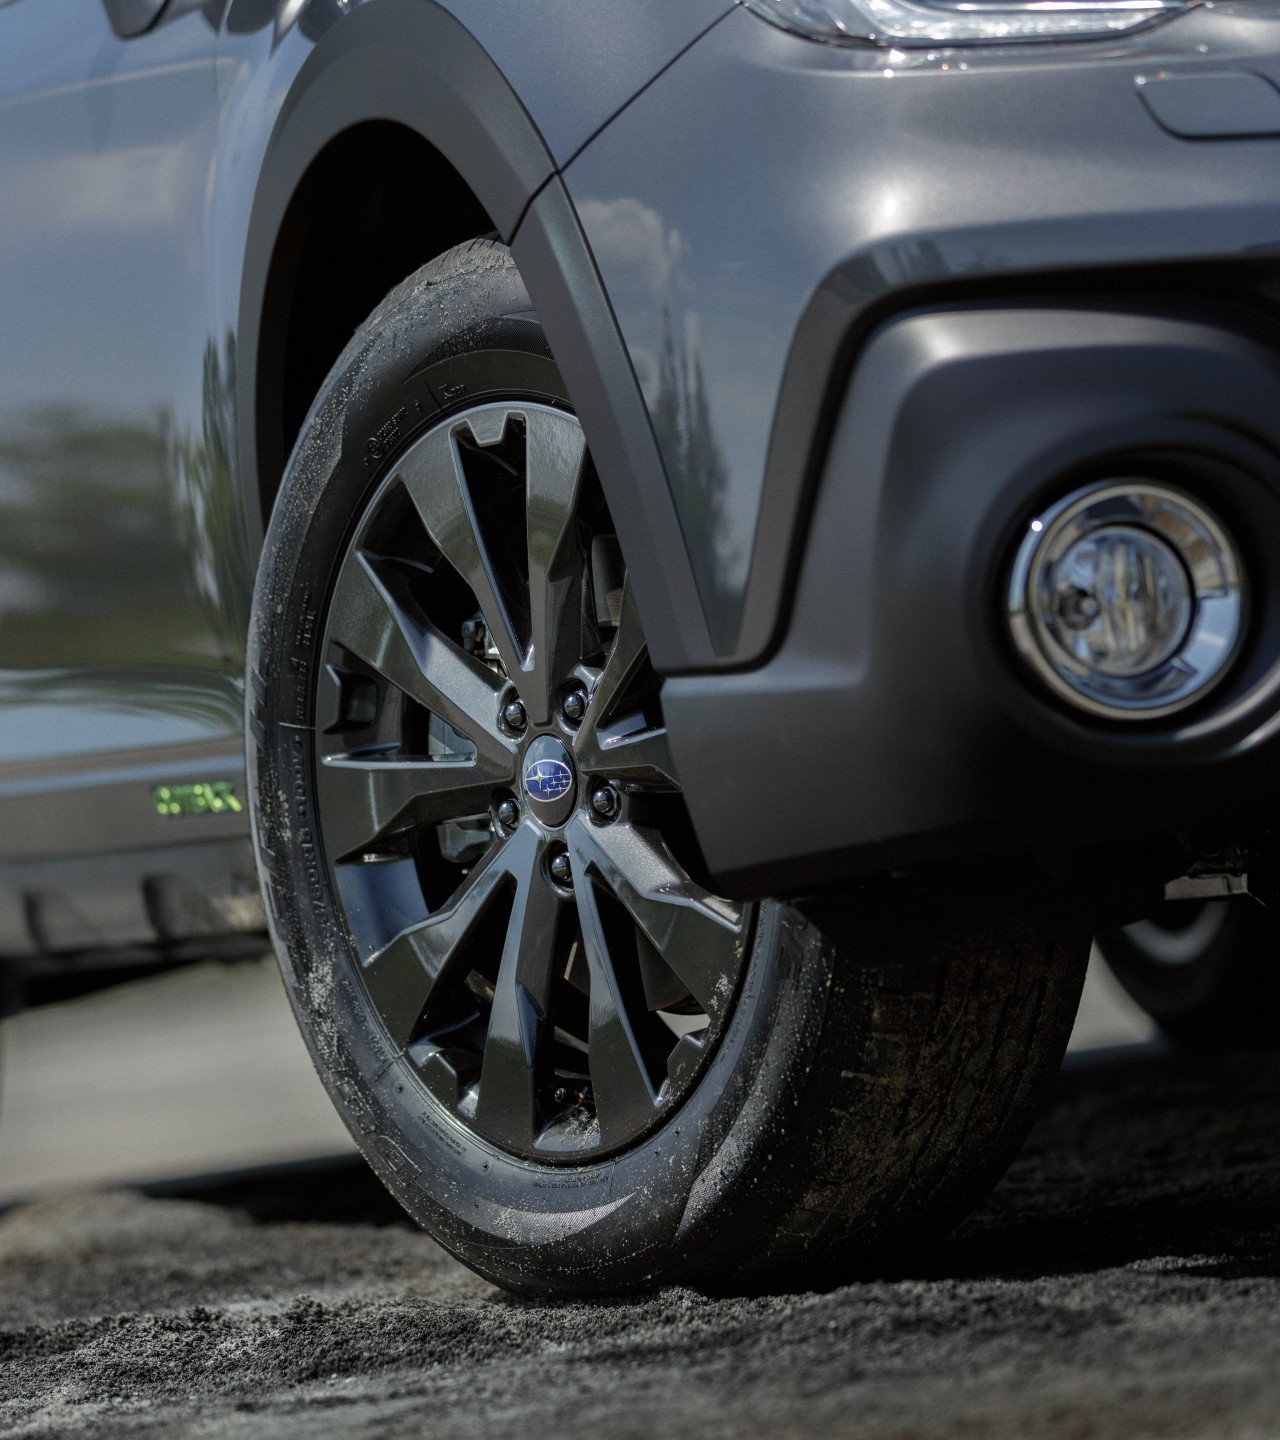 The Subaru Outback X  looks sharp with black 18” alloy wheels.